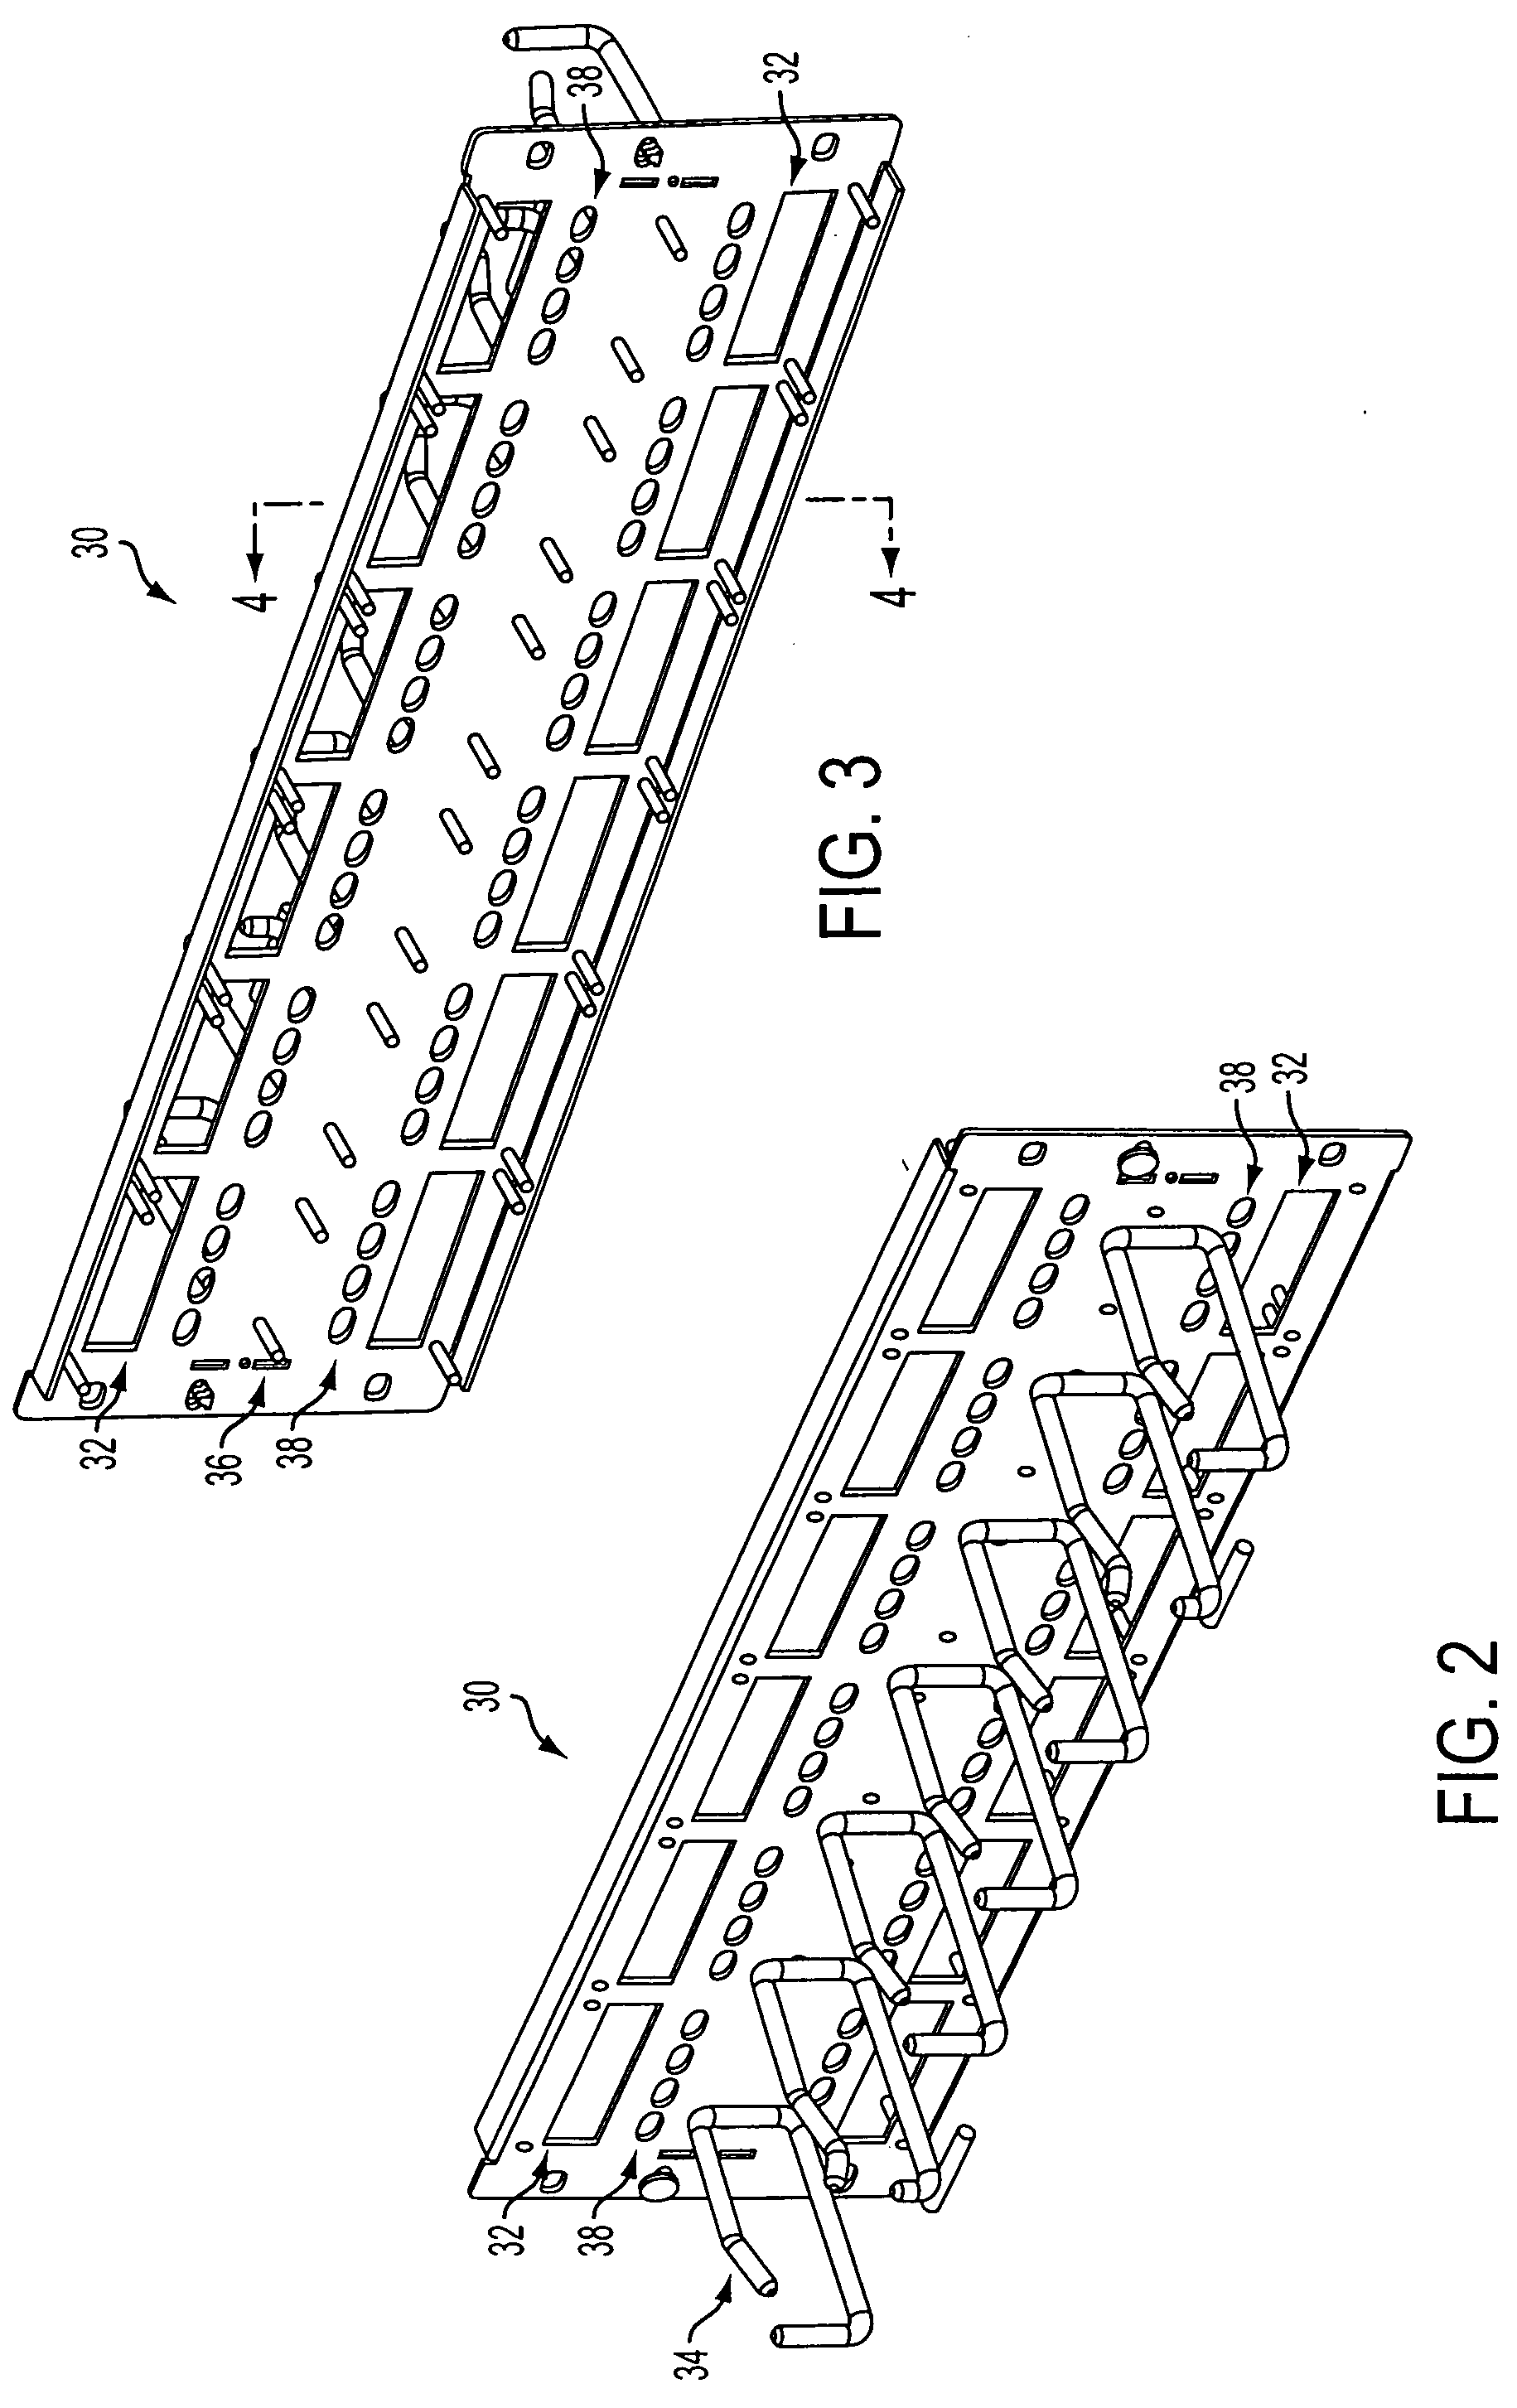 Midspan patch panel with circuit separation for data terminal equipment, power insertion and data collection